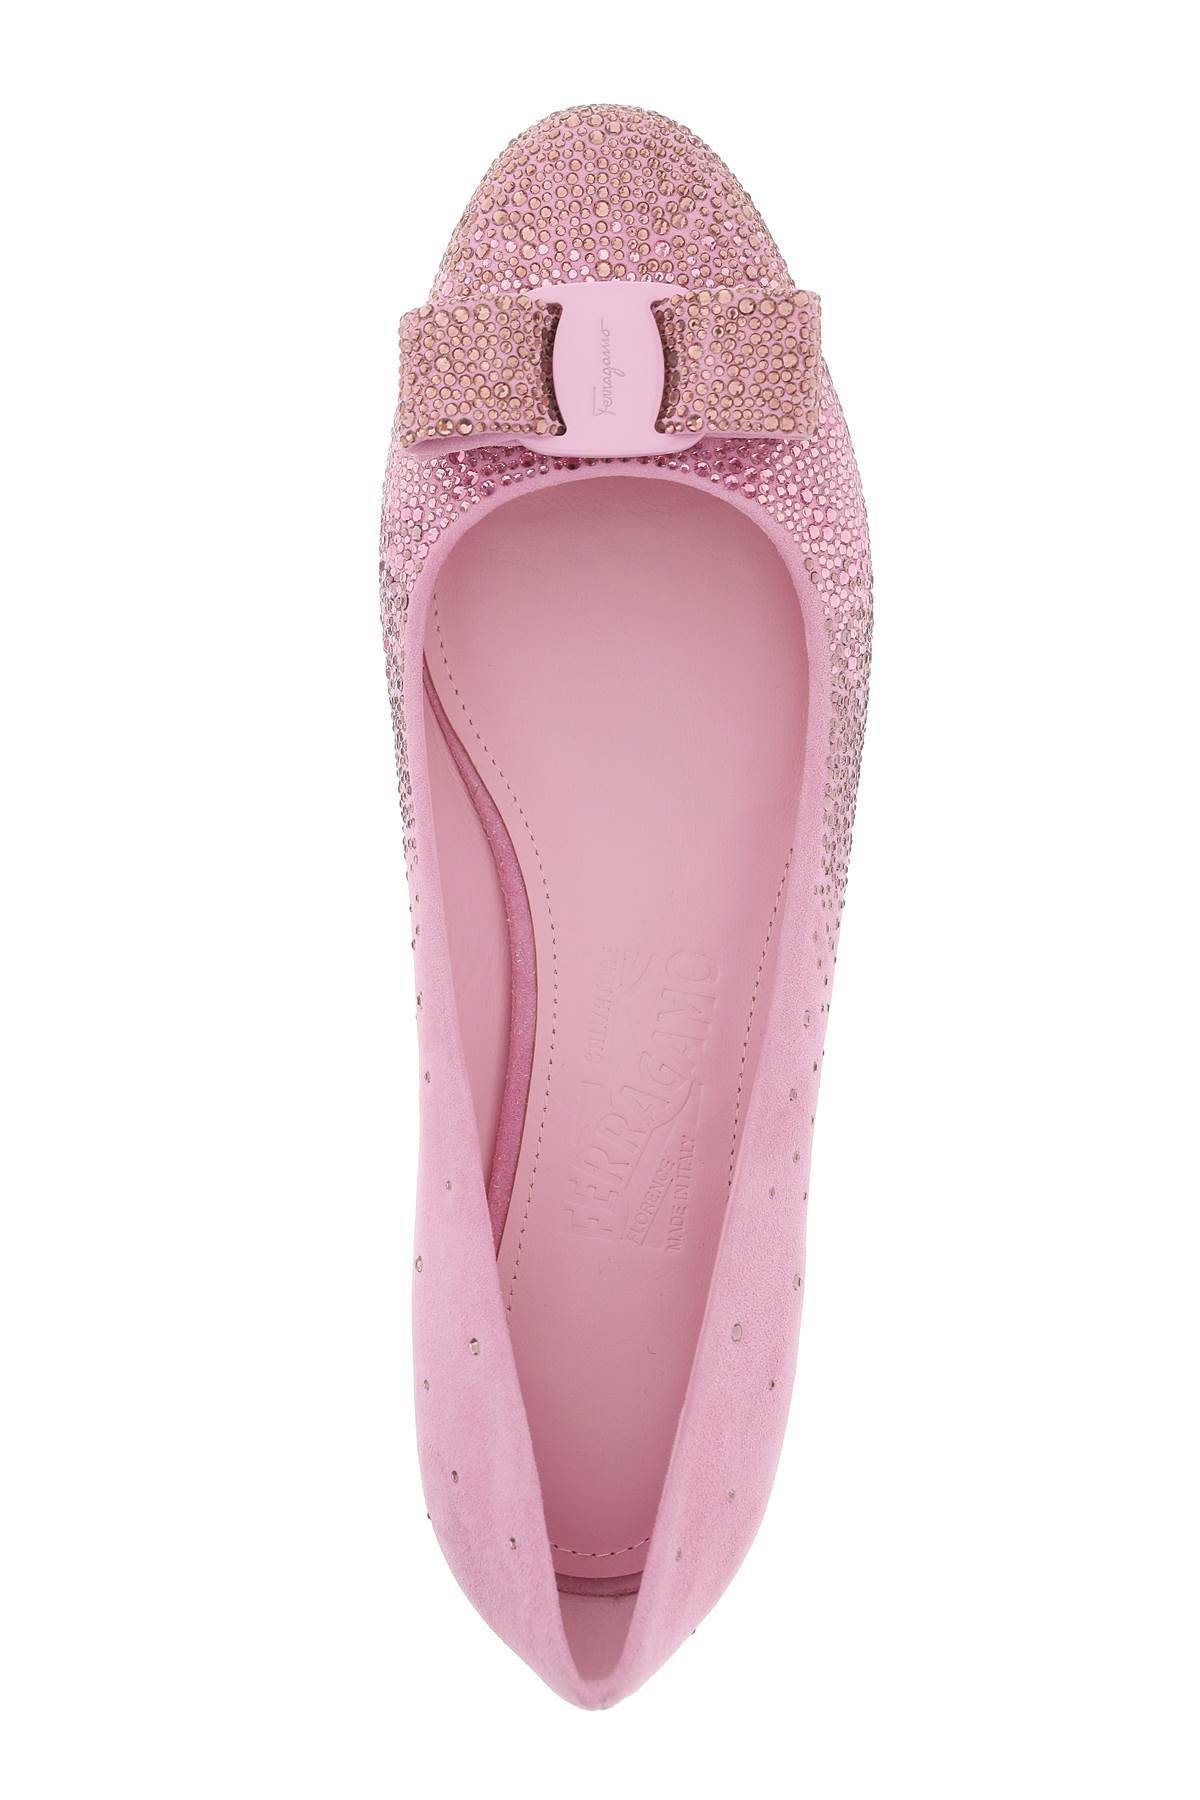 Shop Ferragamo Ballerina Flats With Vara Bow And Crystals In Pink